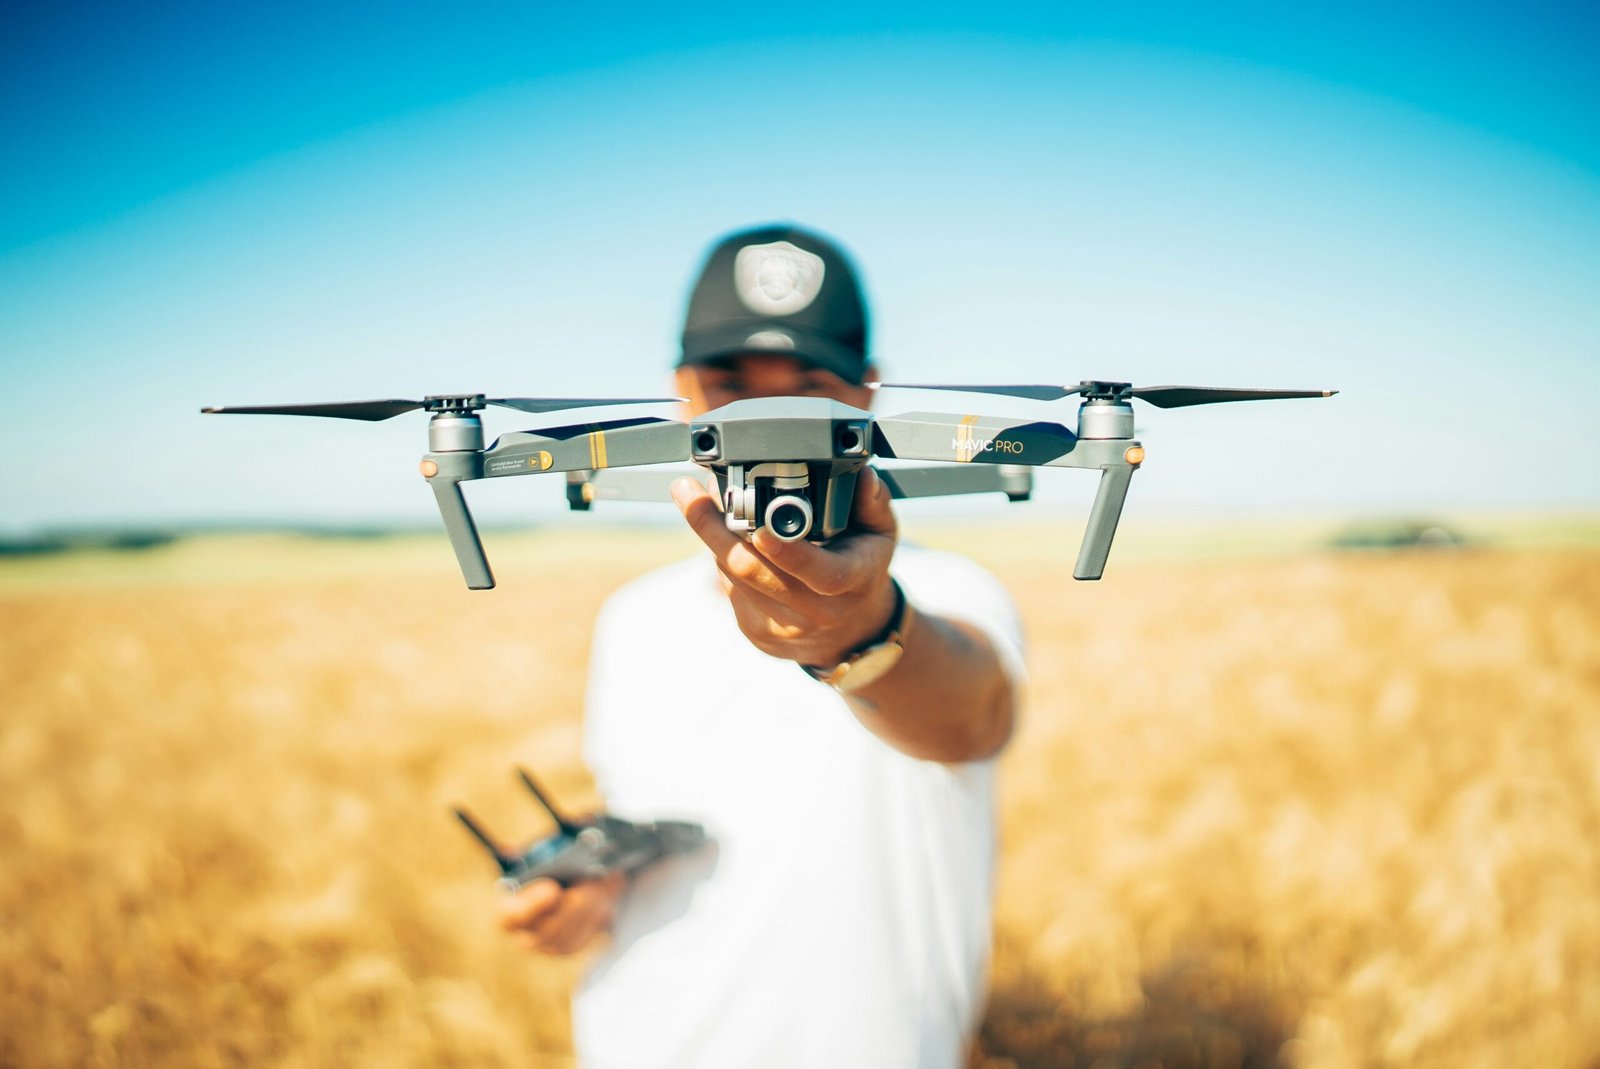 explore the skies with our cutting-edge drone technology. capture stunning aerial footage and enjoy unrivaled perspectives with our premium drones.